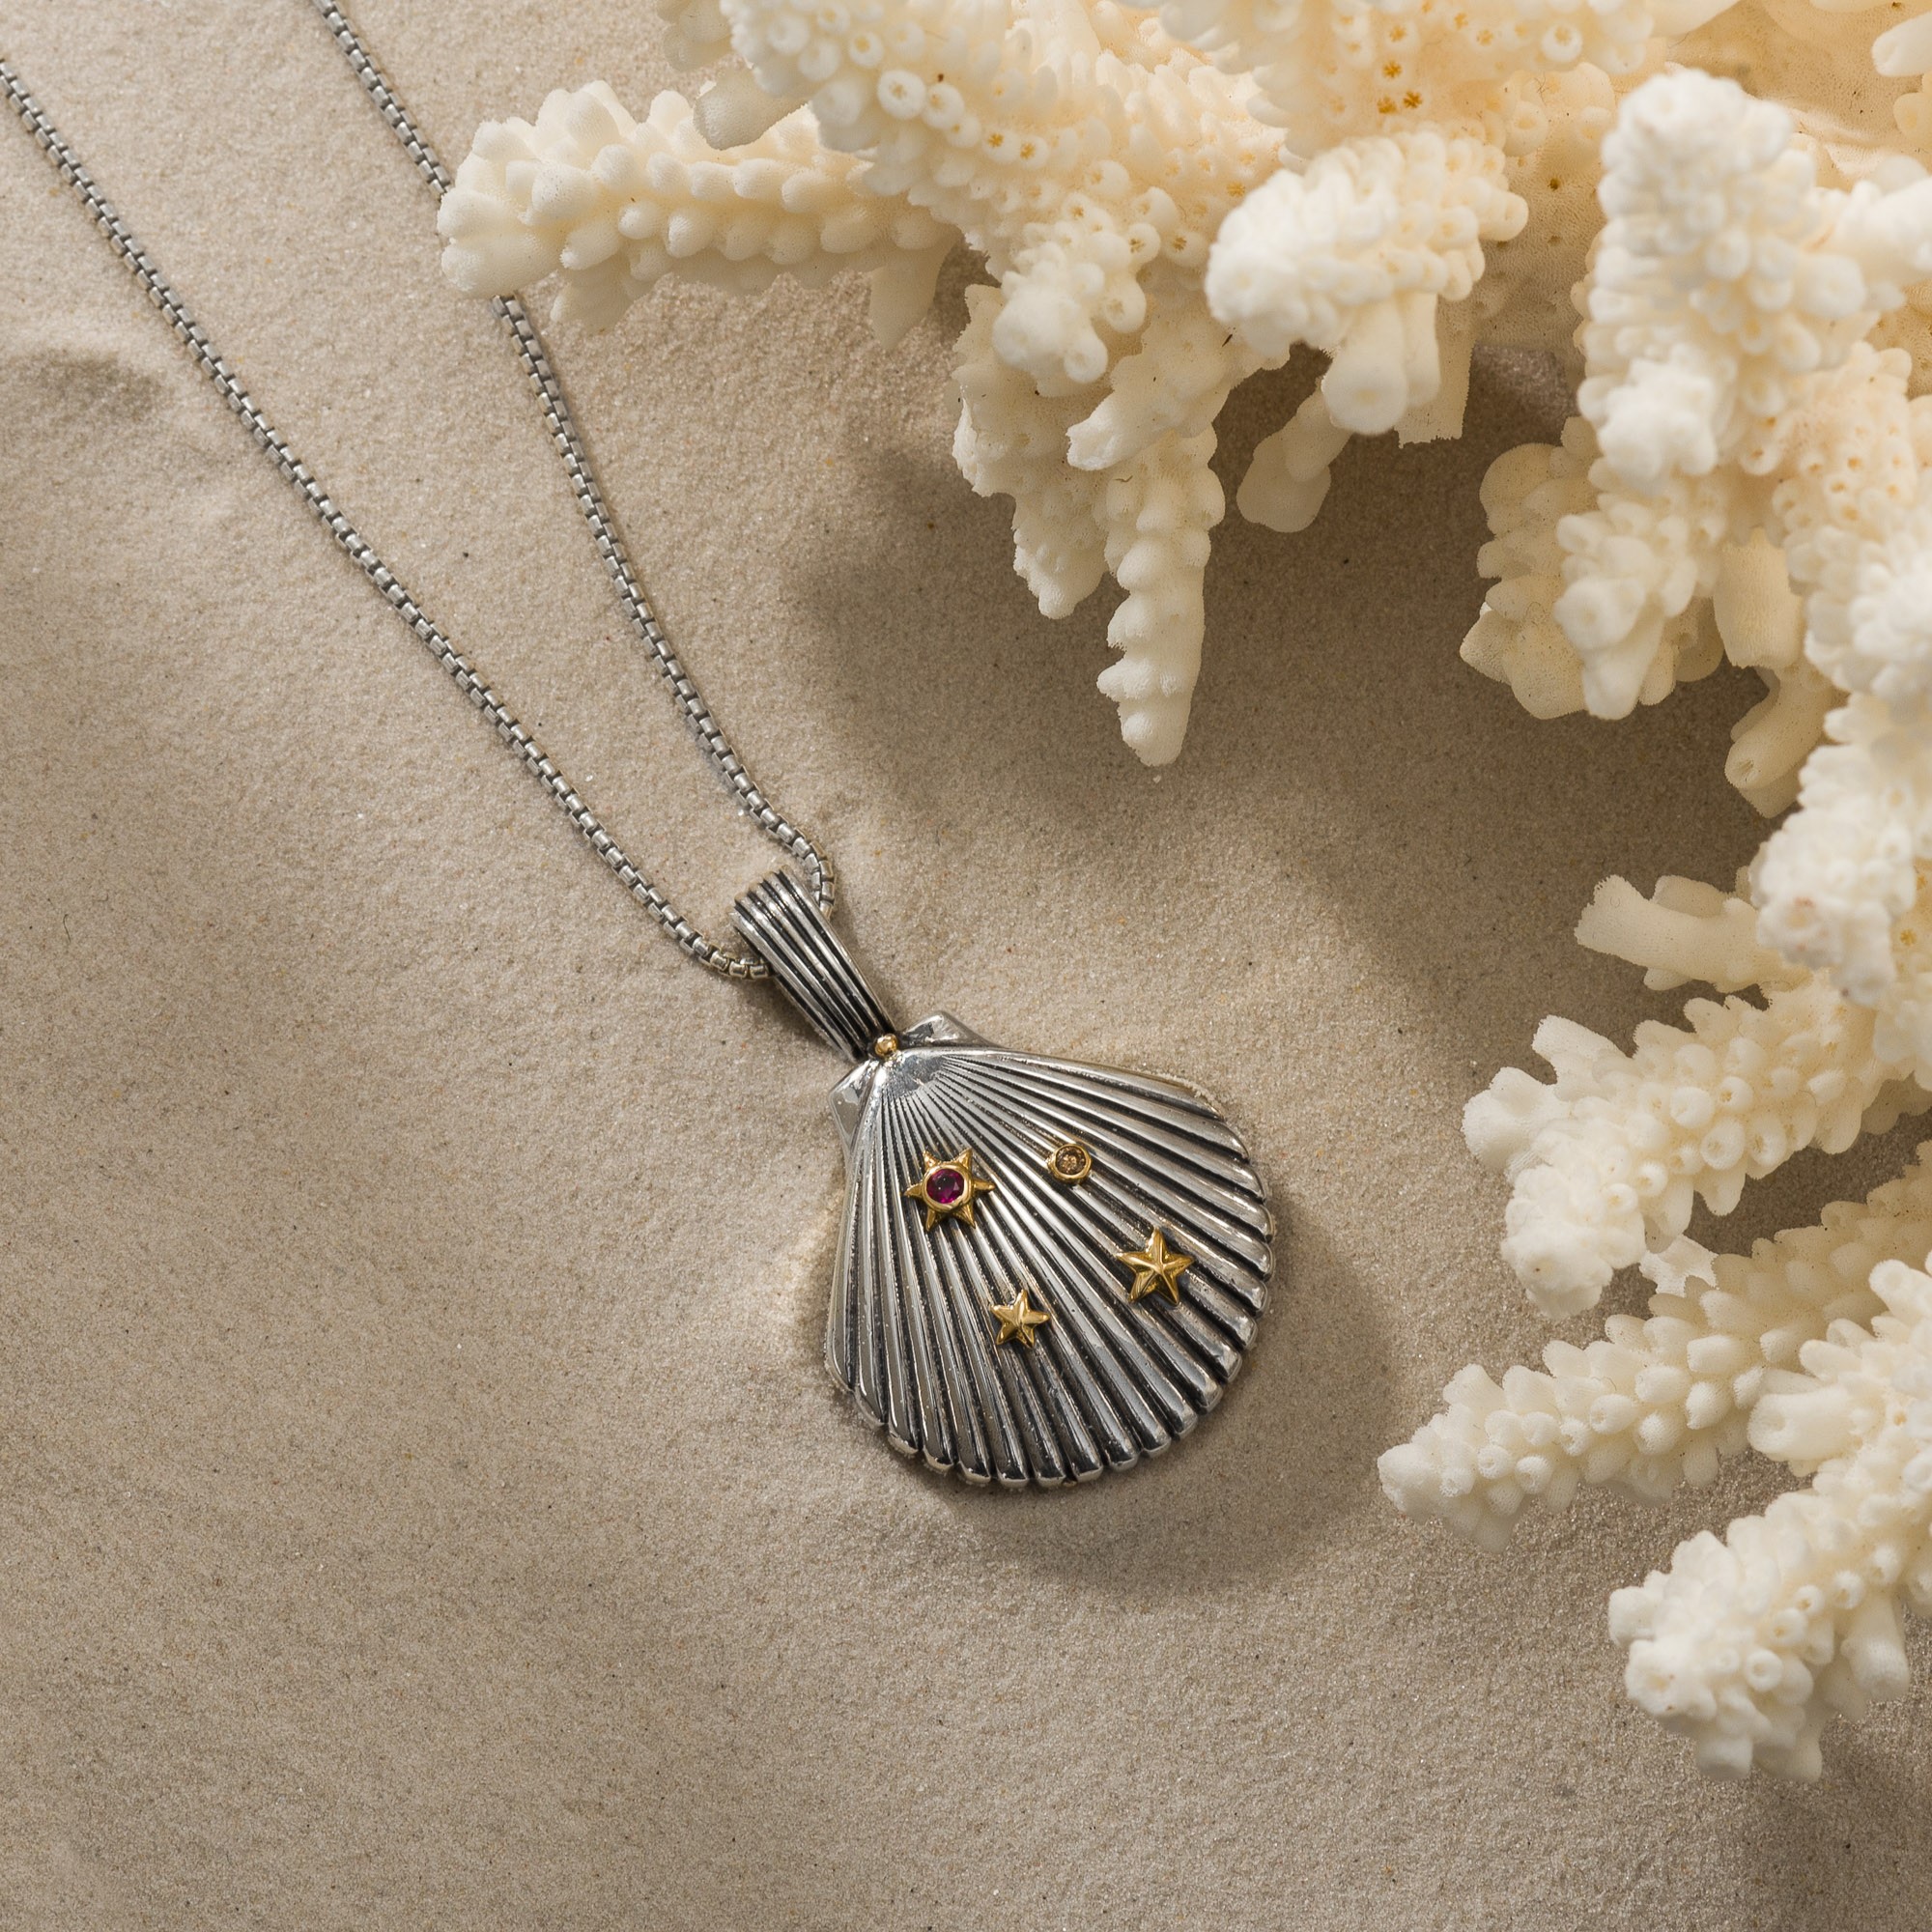 Sea Shell Pendant in Sterling Silver with Details in 18K Gold and Precious Stones